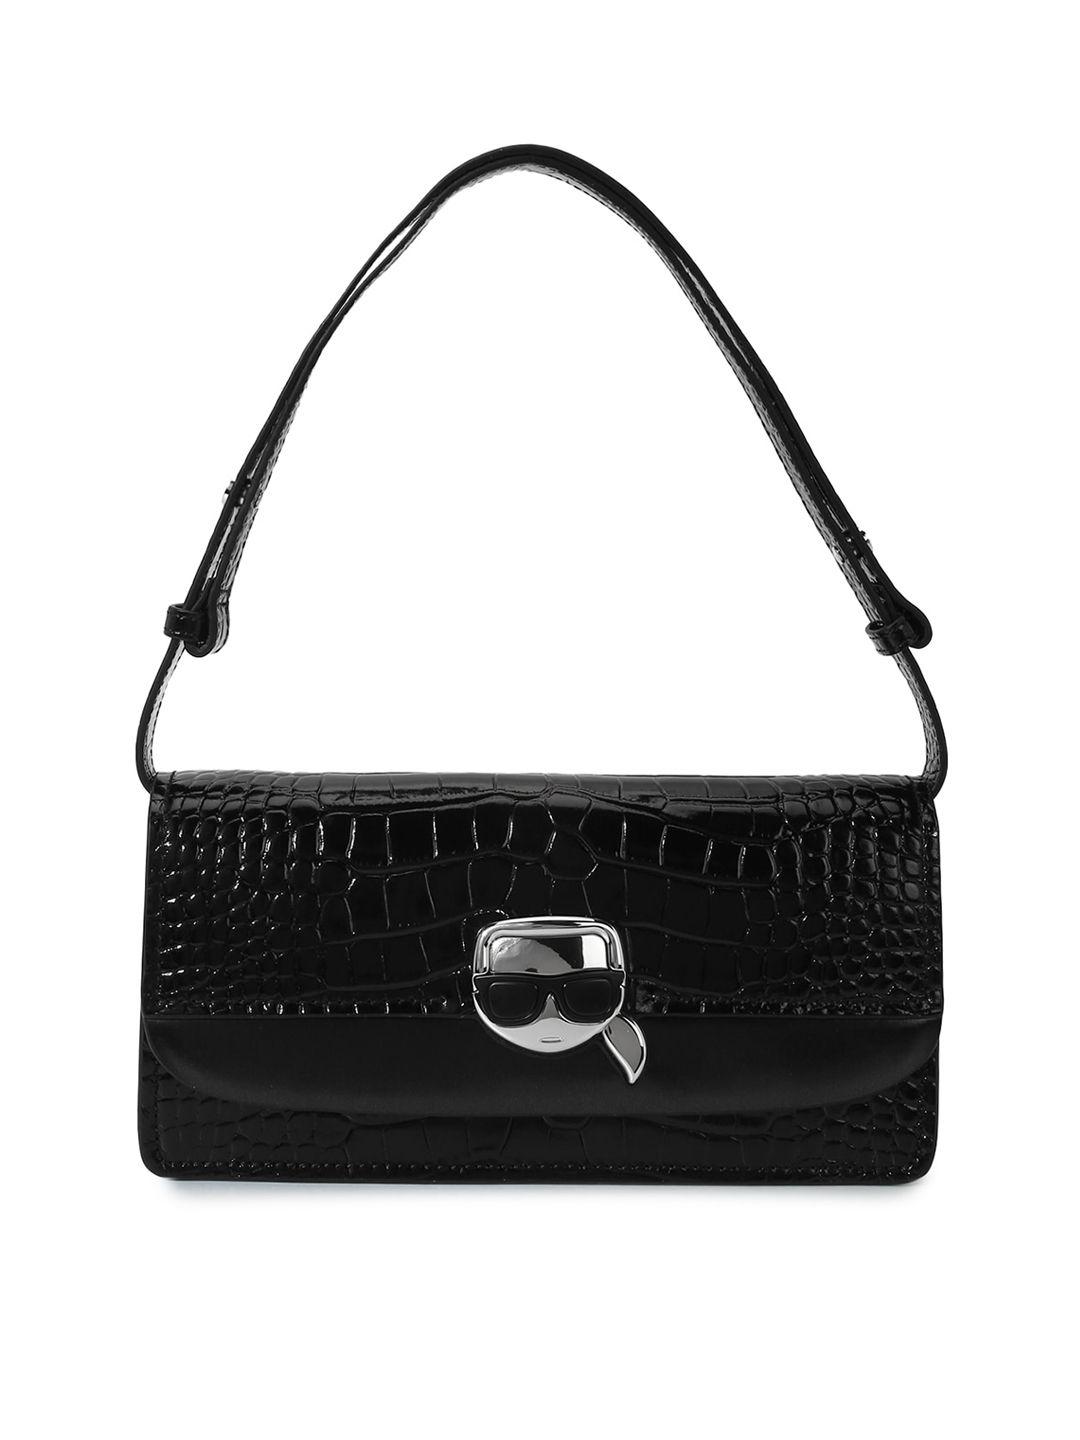 karl lagerfeld animal textured leather structured sling bag